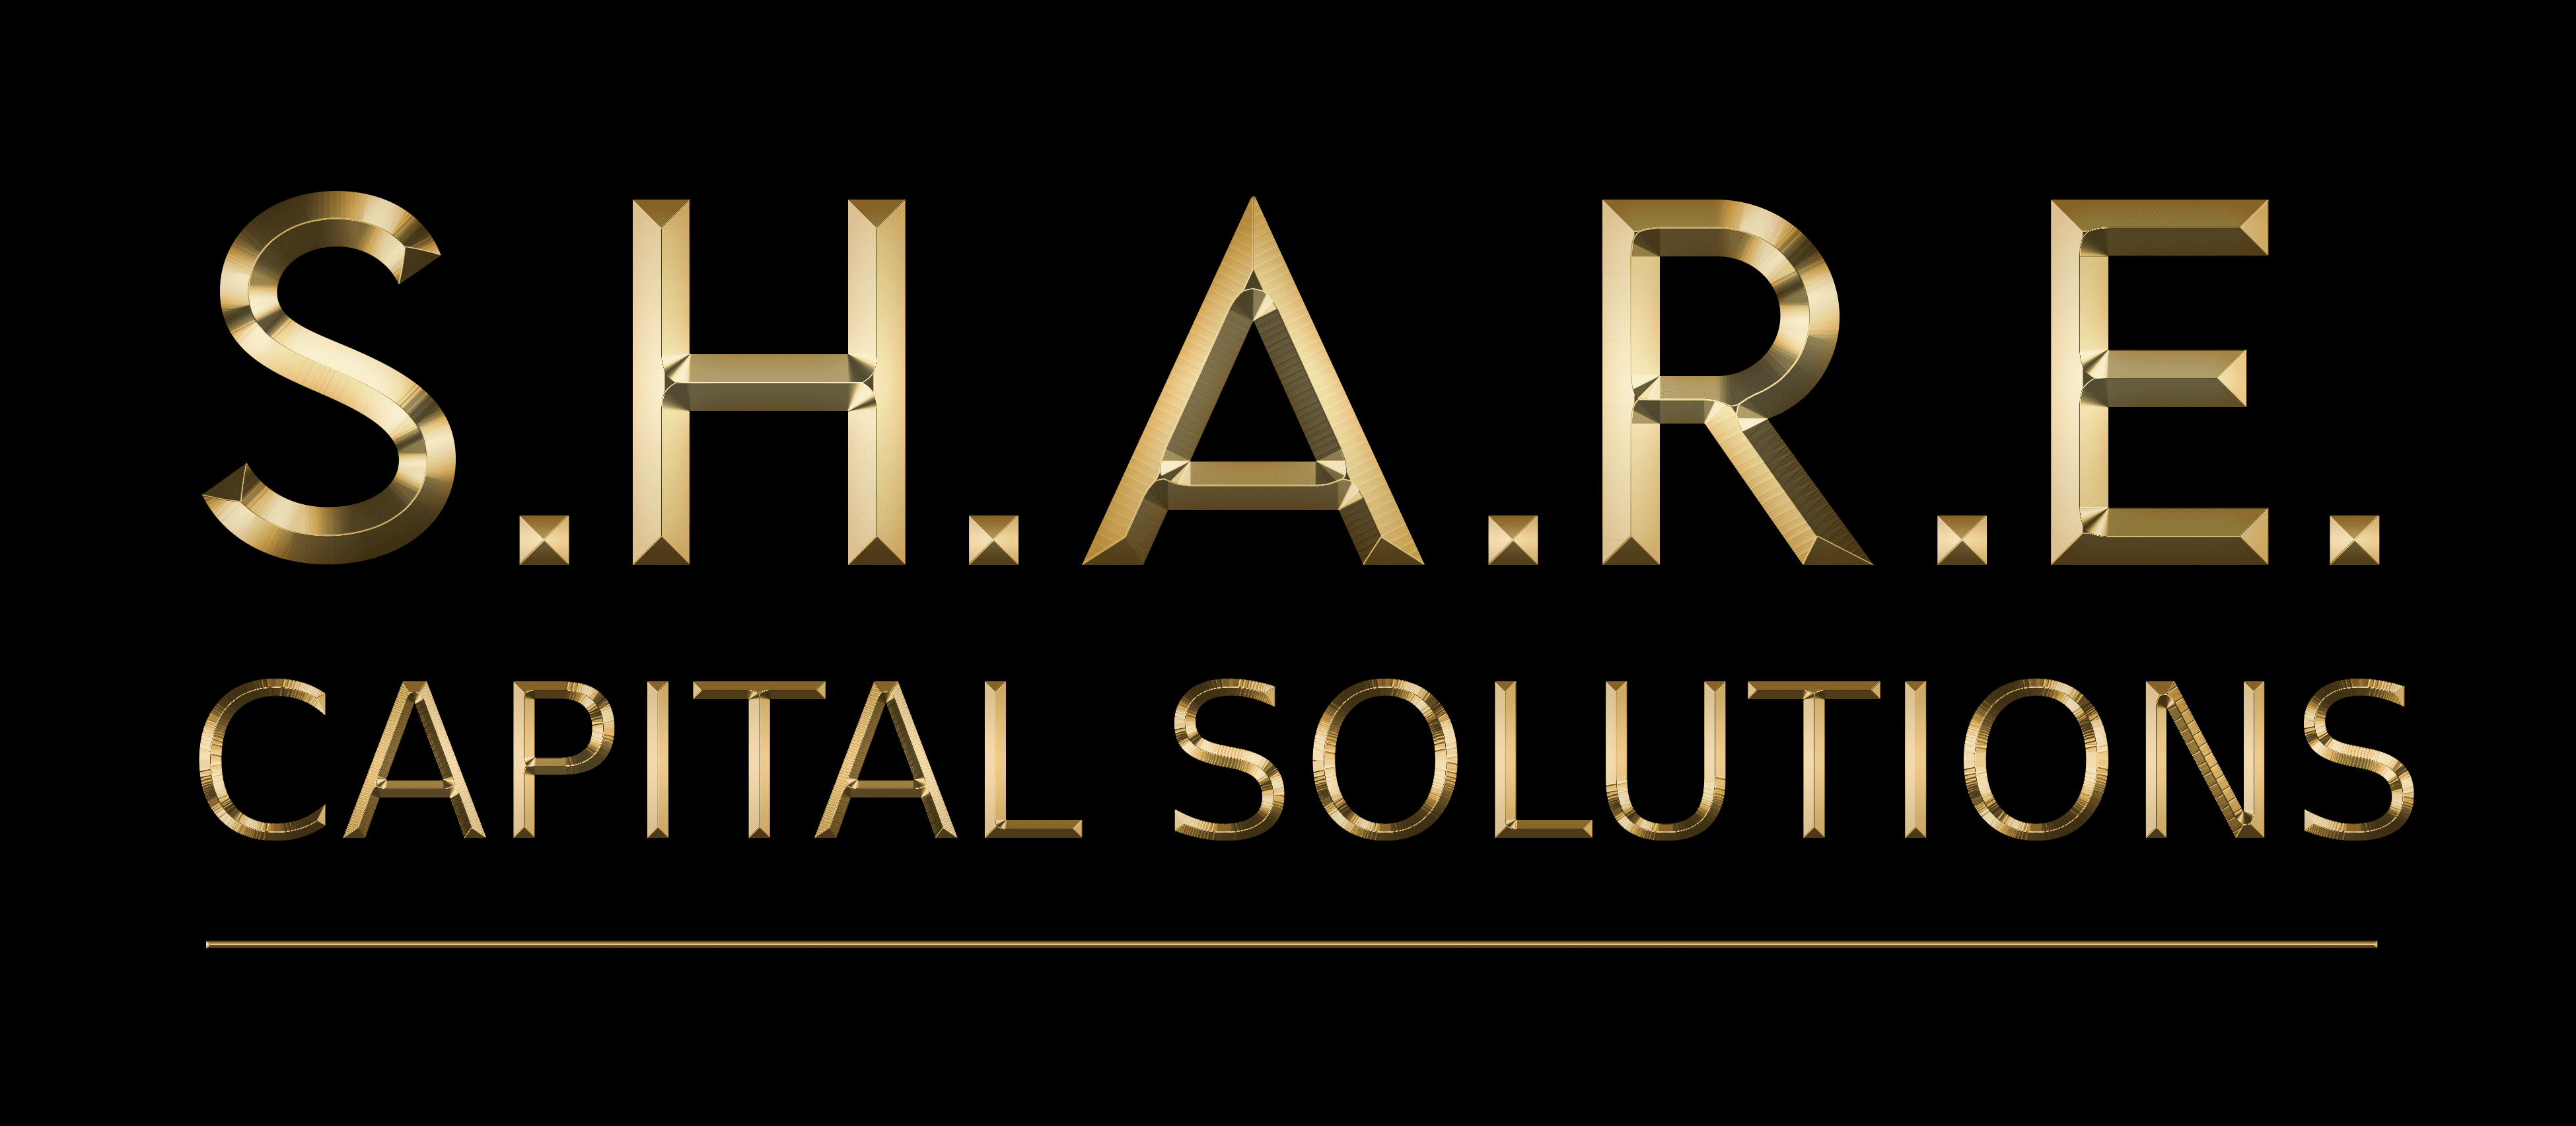 S.H.A.R.E. CAPITAL SOLUTIONS